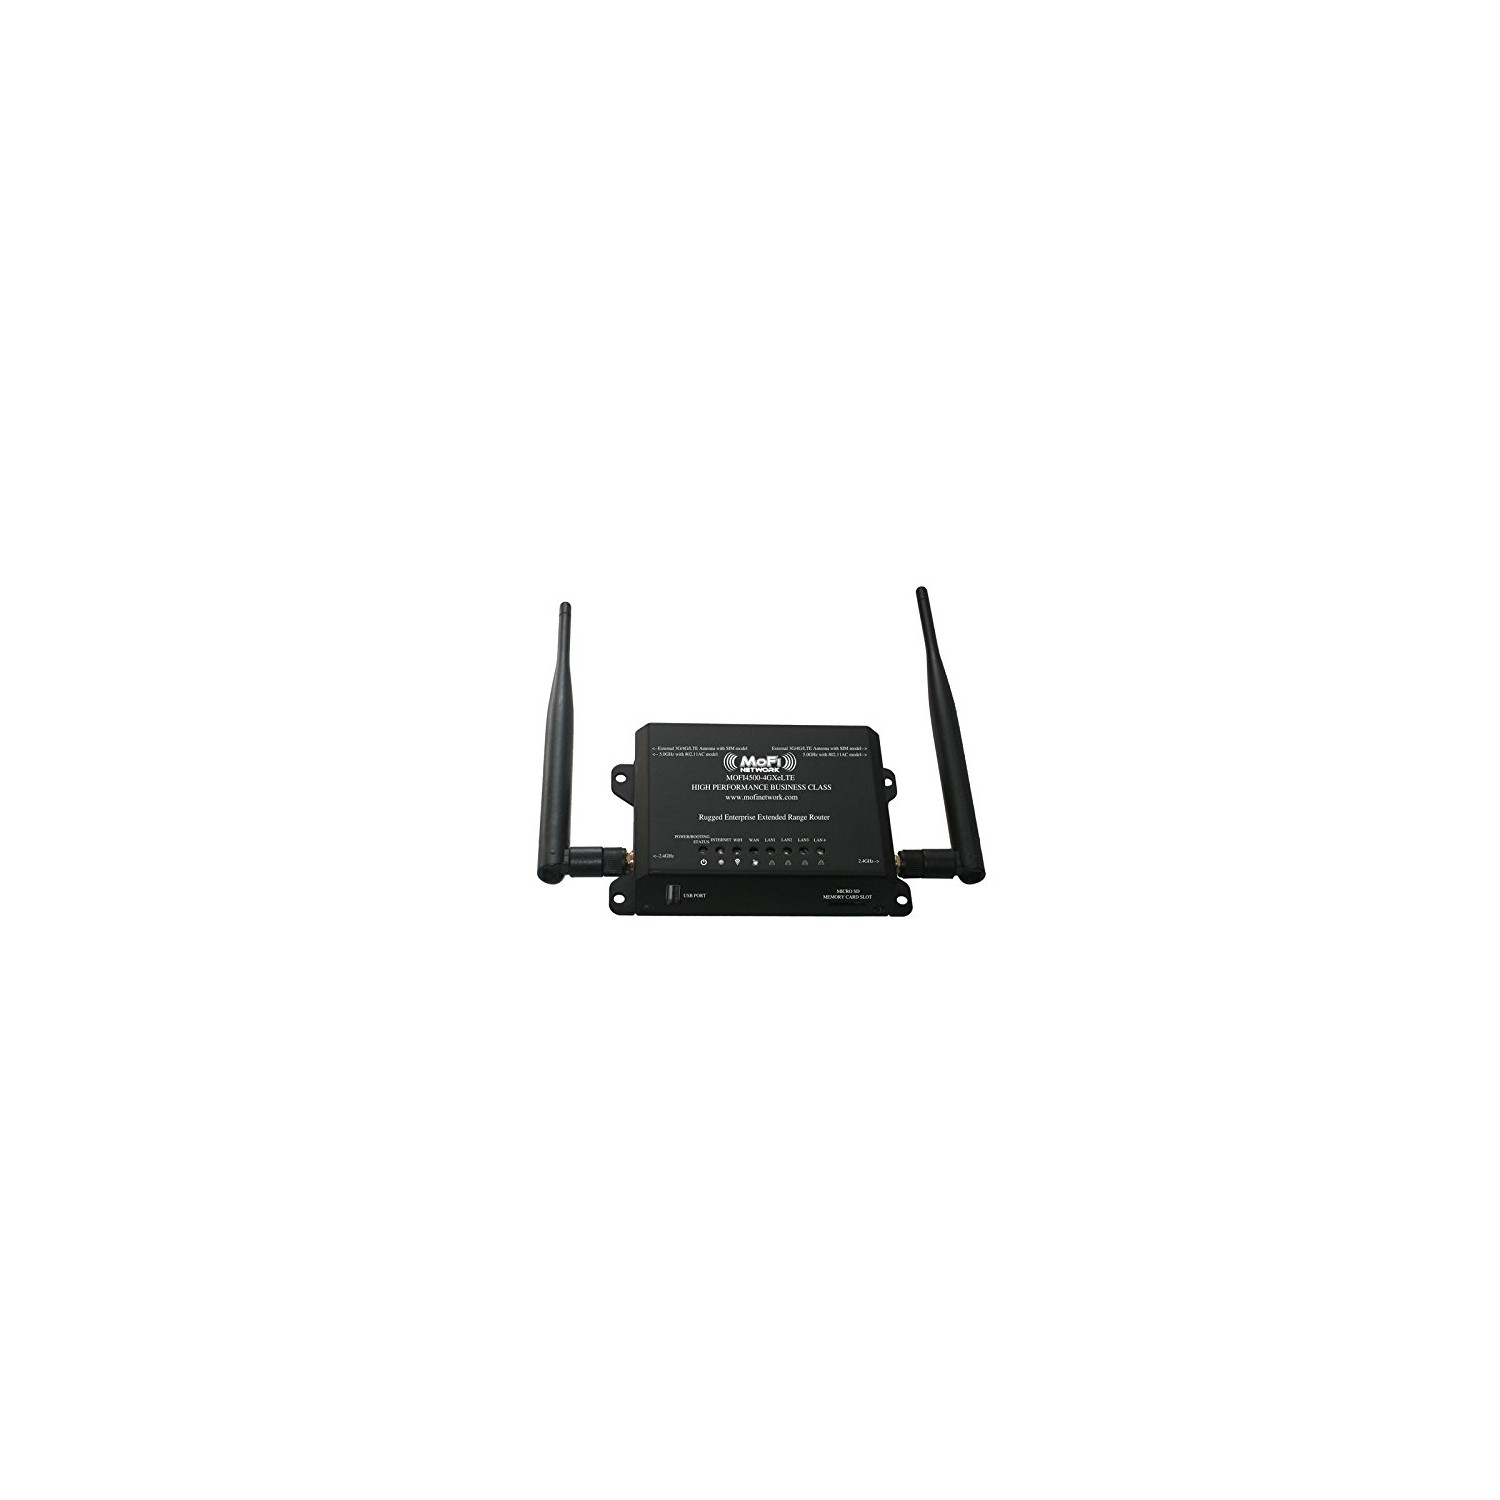 Mofi Network MOFI4500-4GXeLTE 4G/LTE Router with extended WiFi Range